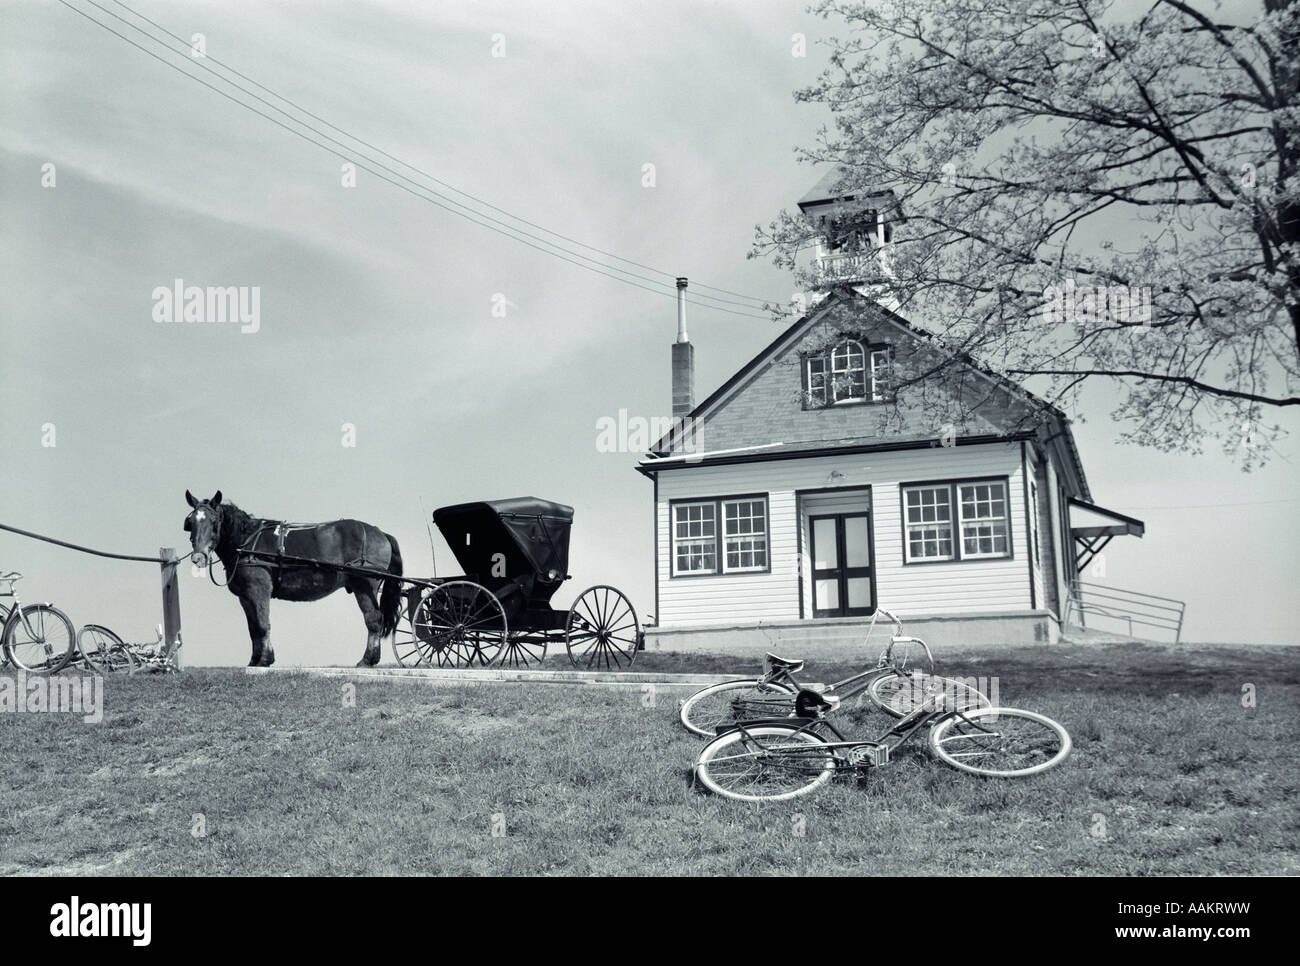 1970s AMISH ONE-ROOM SCHOOLHOUSE AT TOP OF HILL HORSE & BUGGY & BICYCLES PARKED OUTSIDE Stock Photo